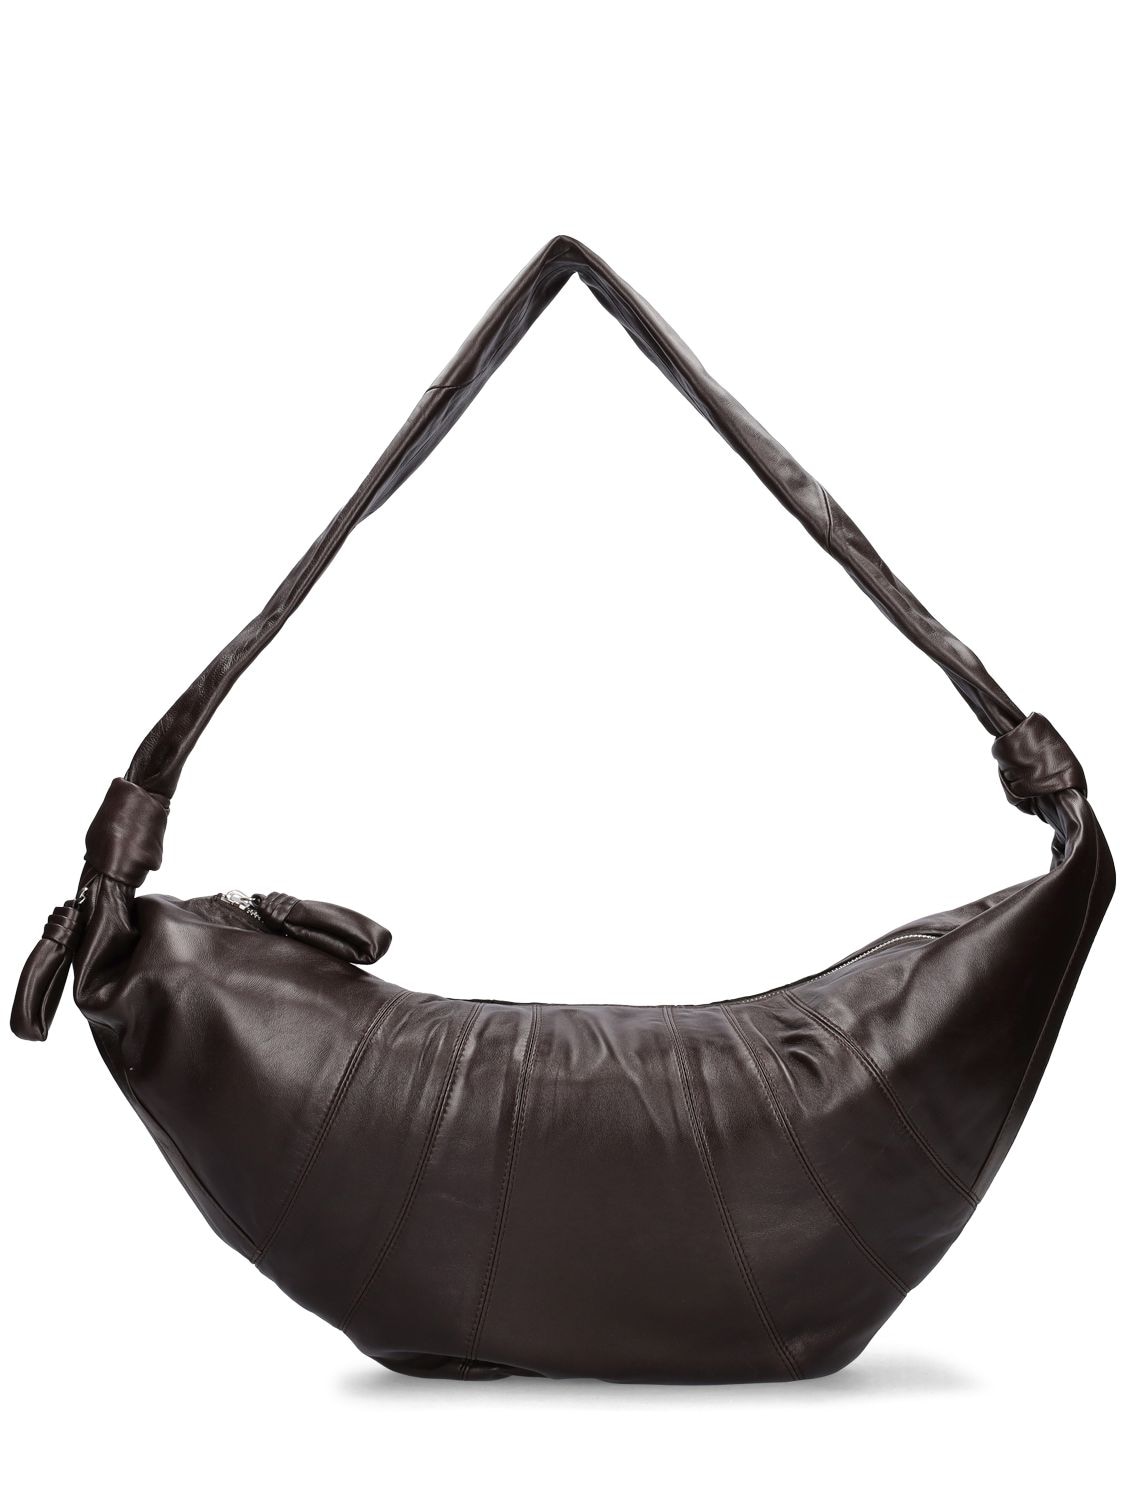 Lemaire Large Croissant Leather Crossbody Bag In Dark Chocolate